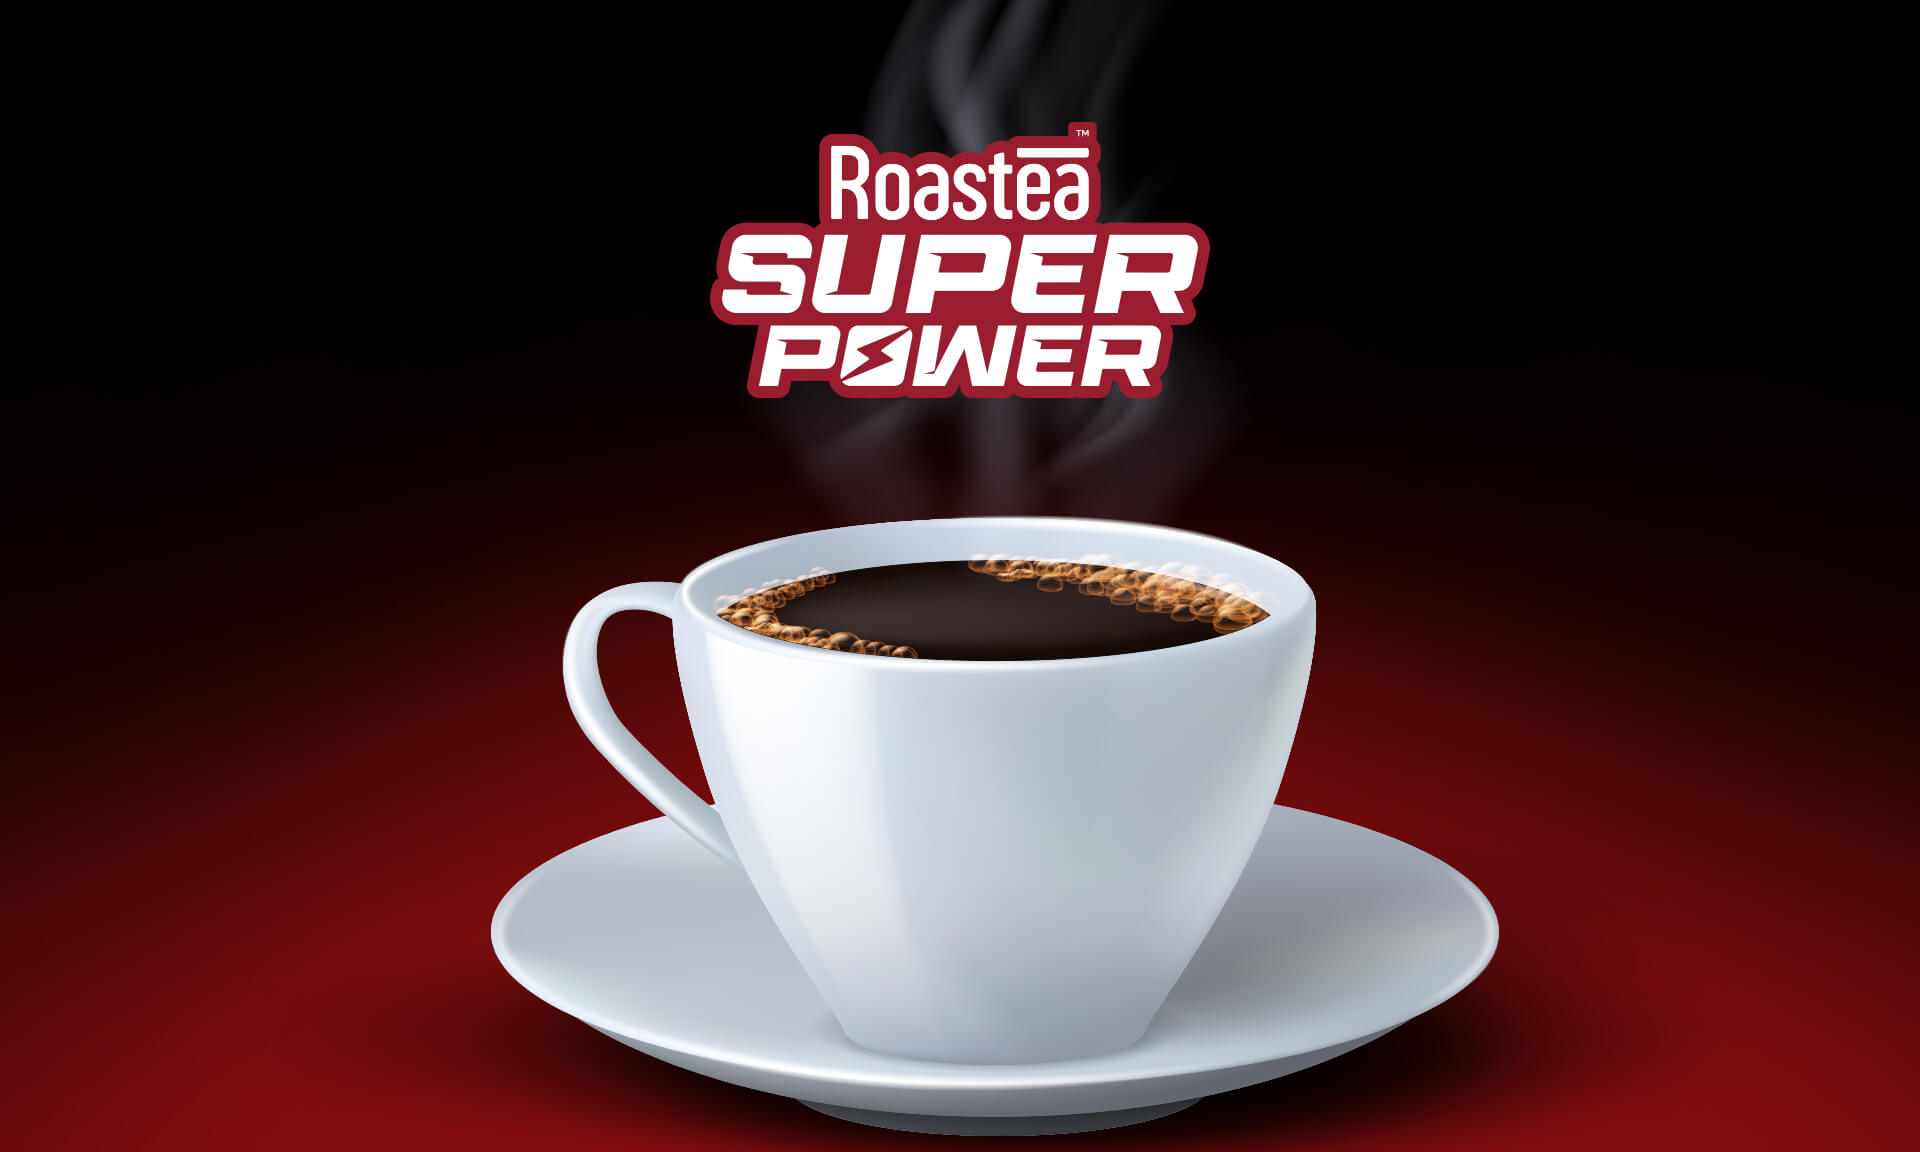 Roastea Super Power Coffee- One cup is Enough